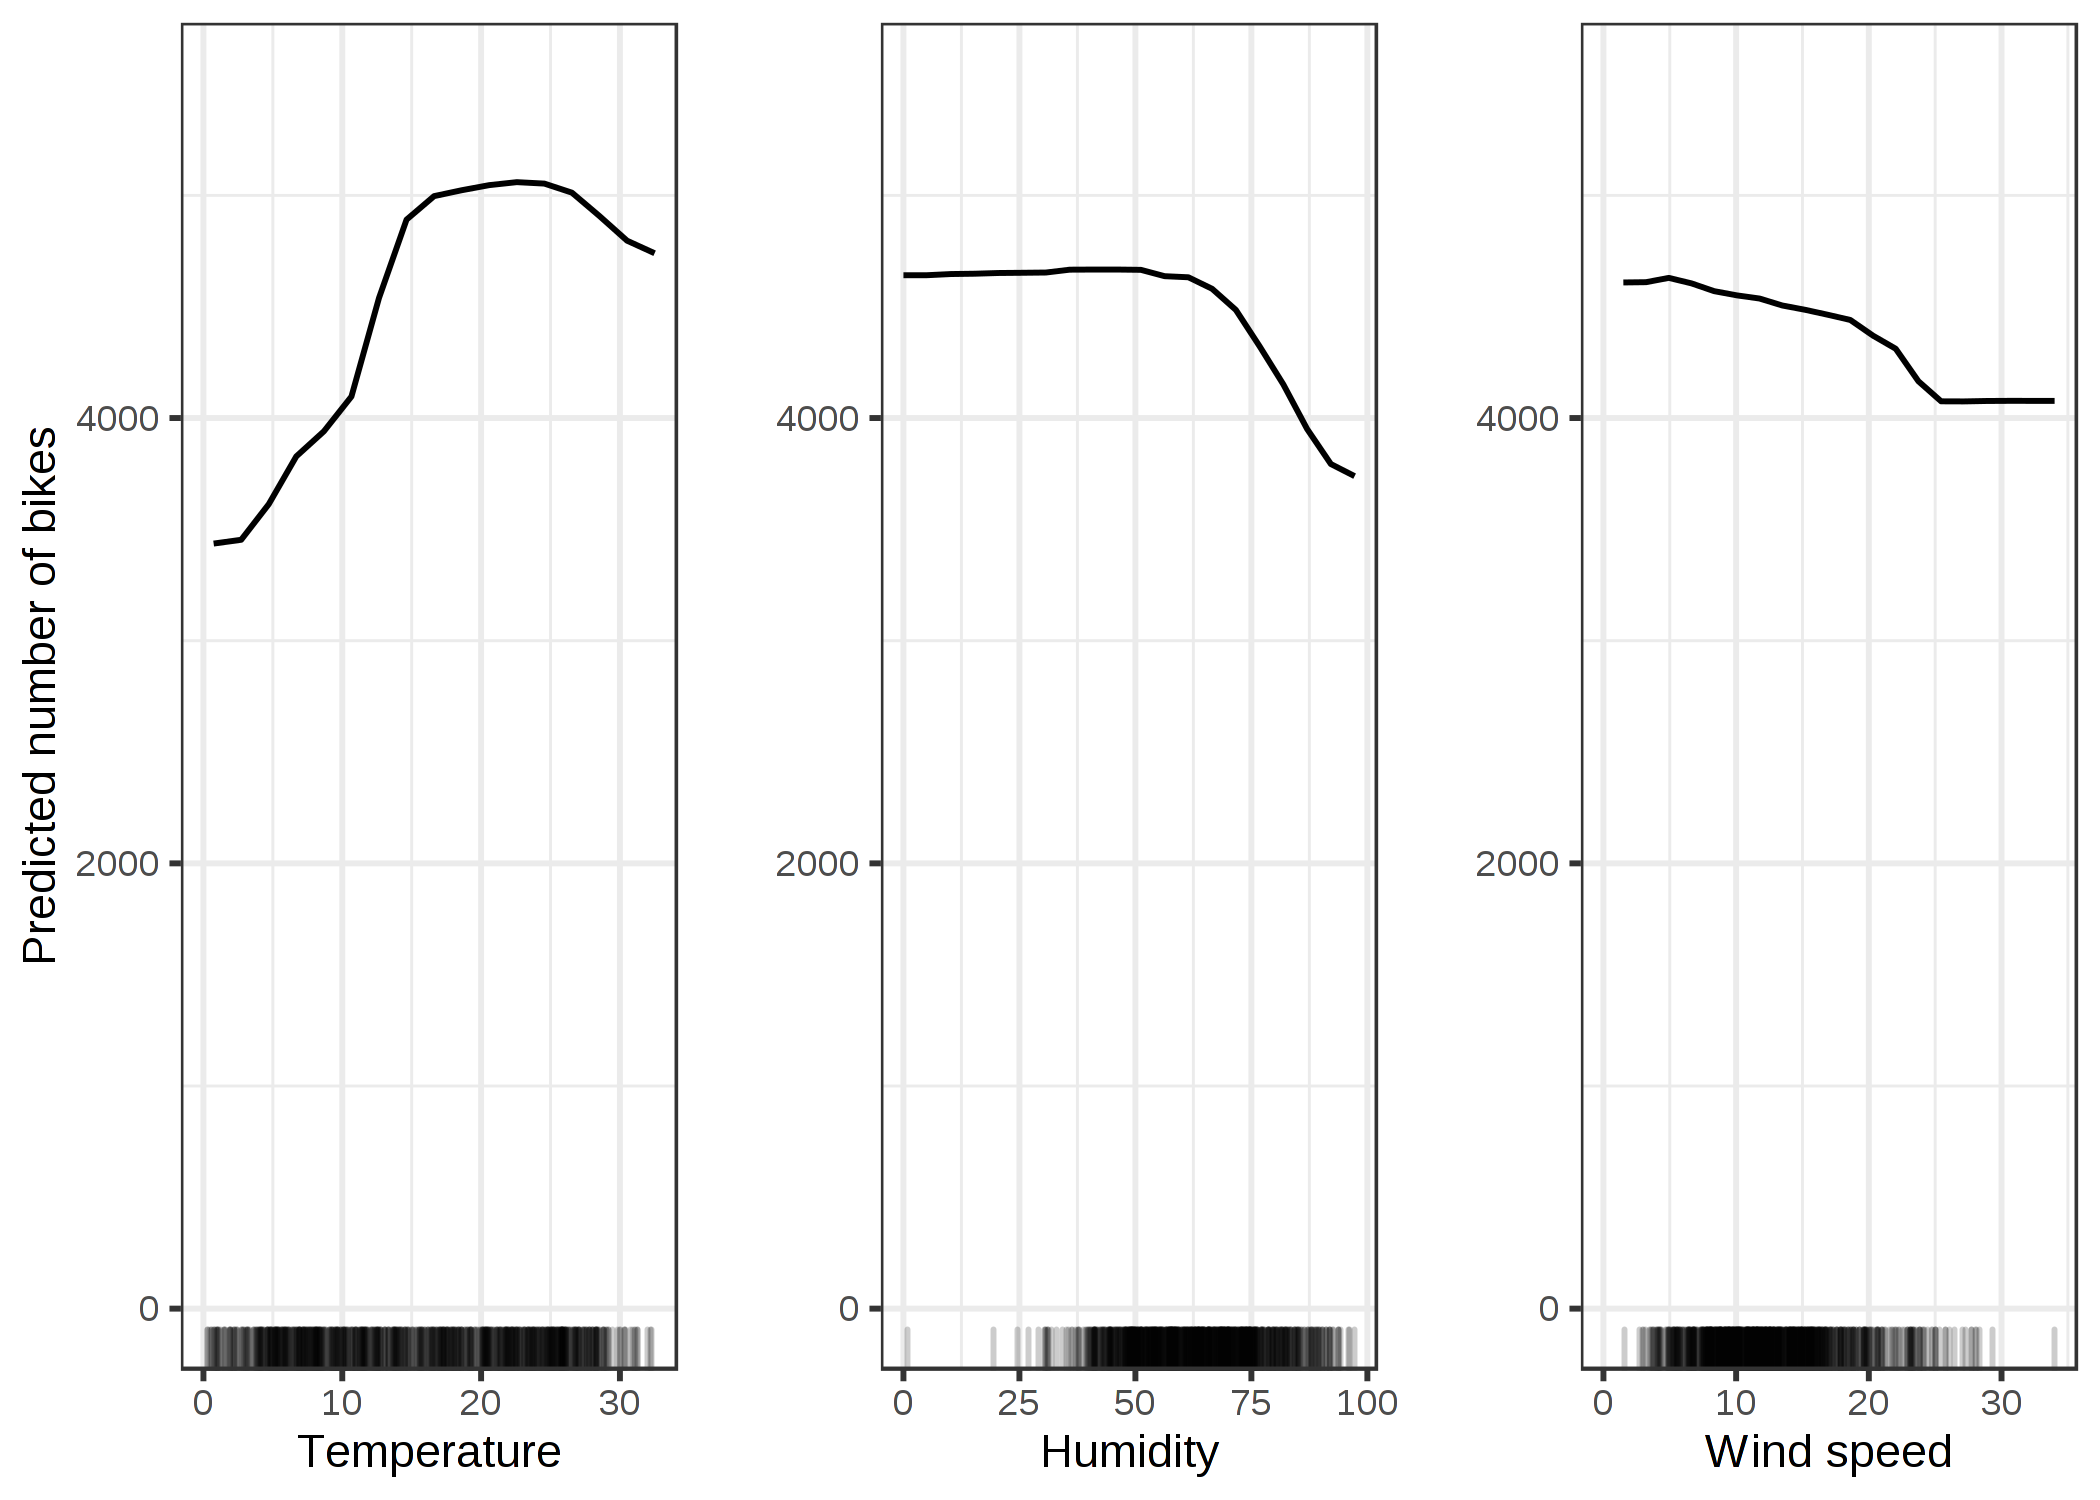 PDPs for the bicycle count prediction model and temperature, humidity and wind speed. The largest differences can be seen in the temperature. The hotter, the more bikes are rented. This trend goes up to 20 degrees Celsius, then flattens and drops slightly at 30. Marks on the x-axis indicate the data distribution.